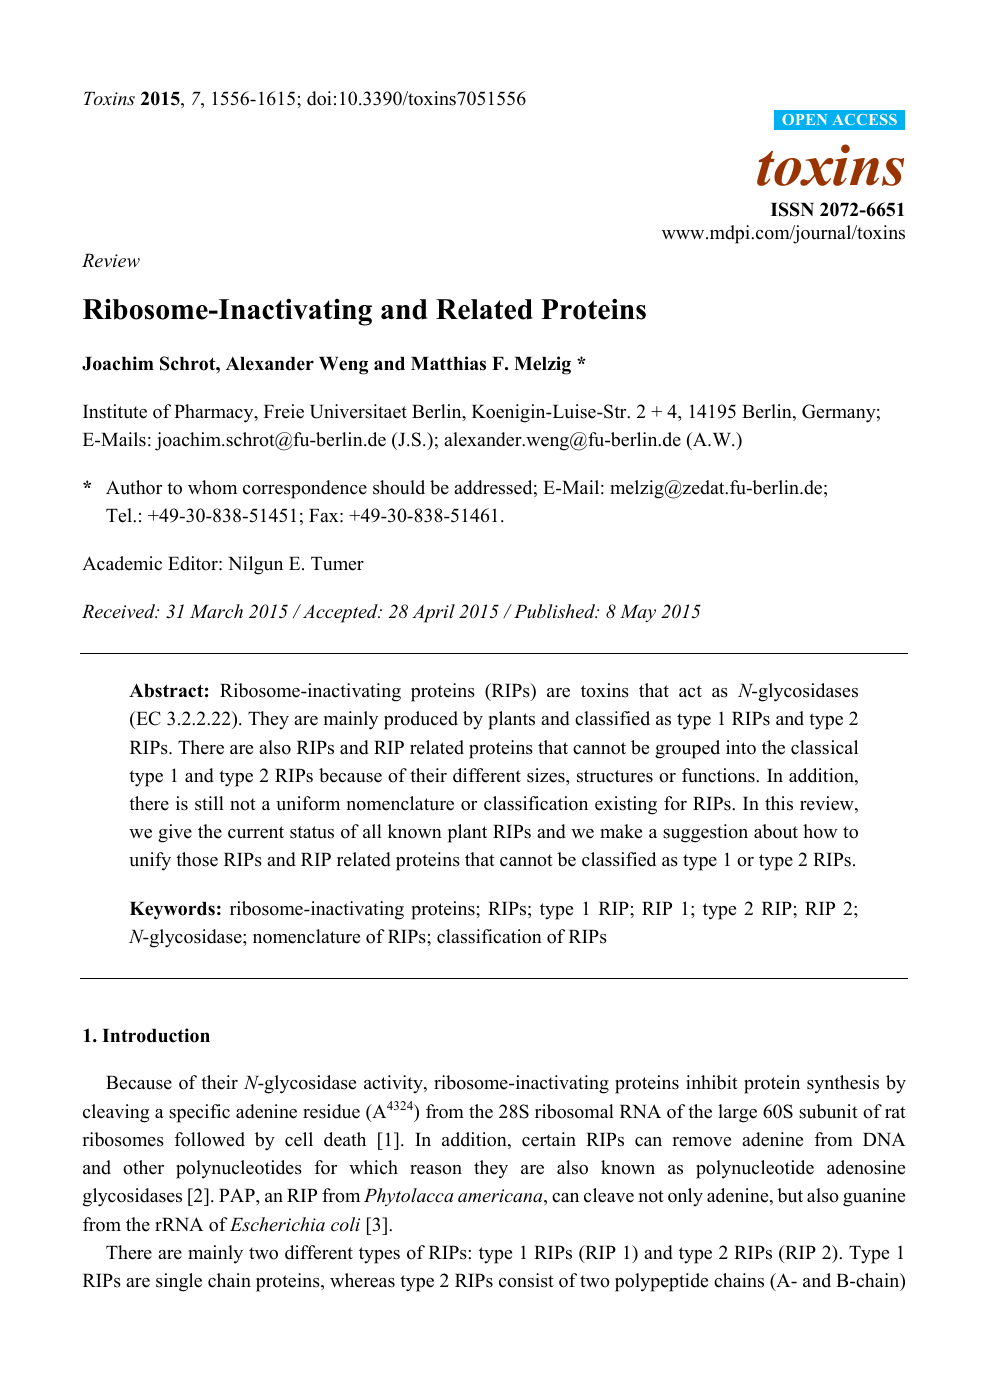 Ribosome-Inactivating and Related Proteins – topic of research 